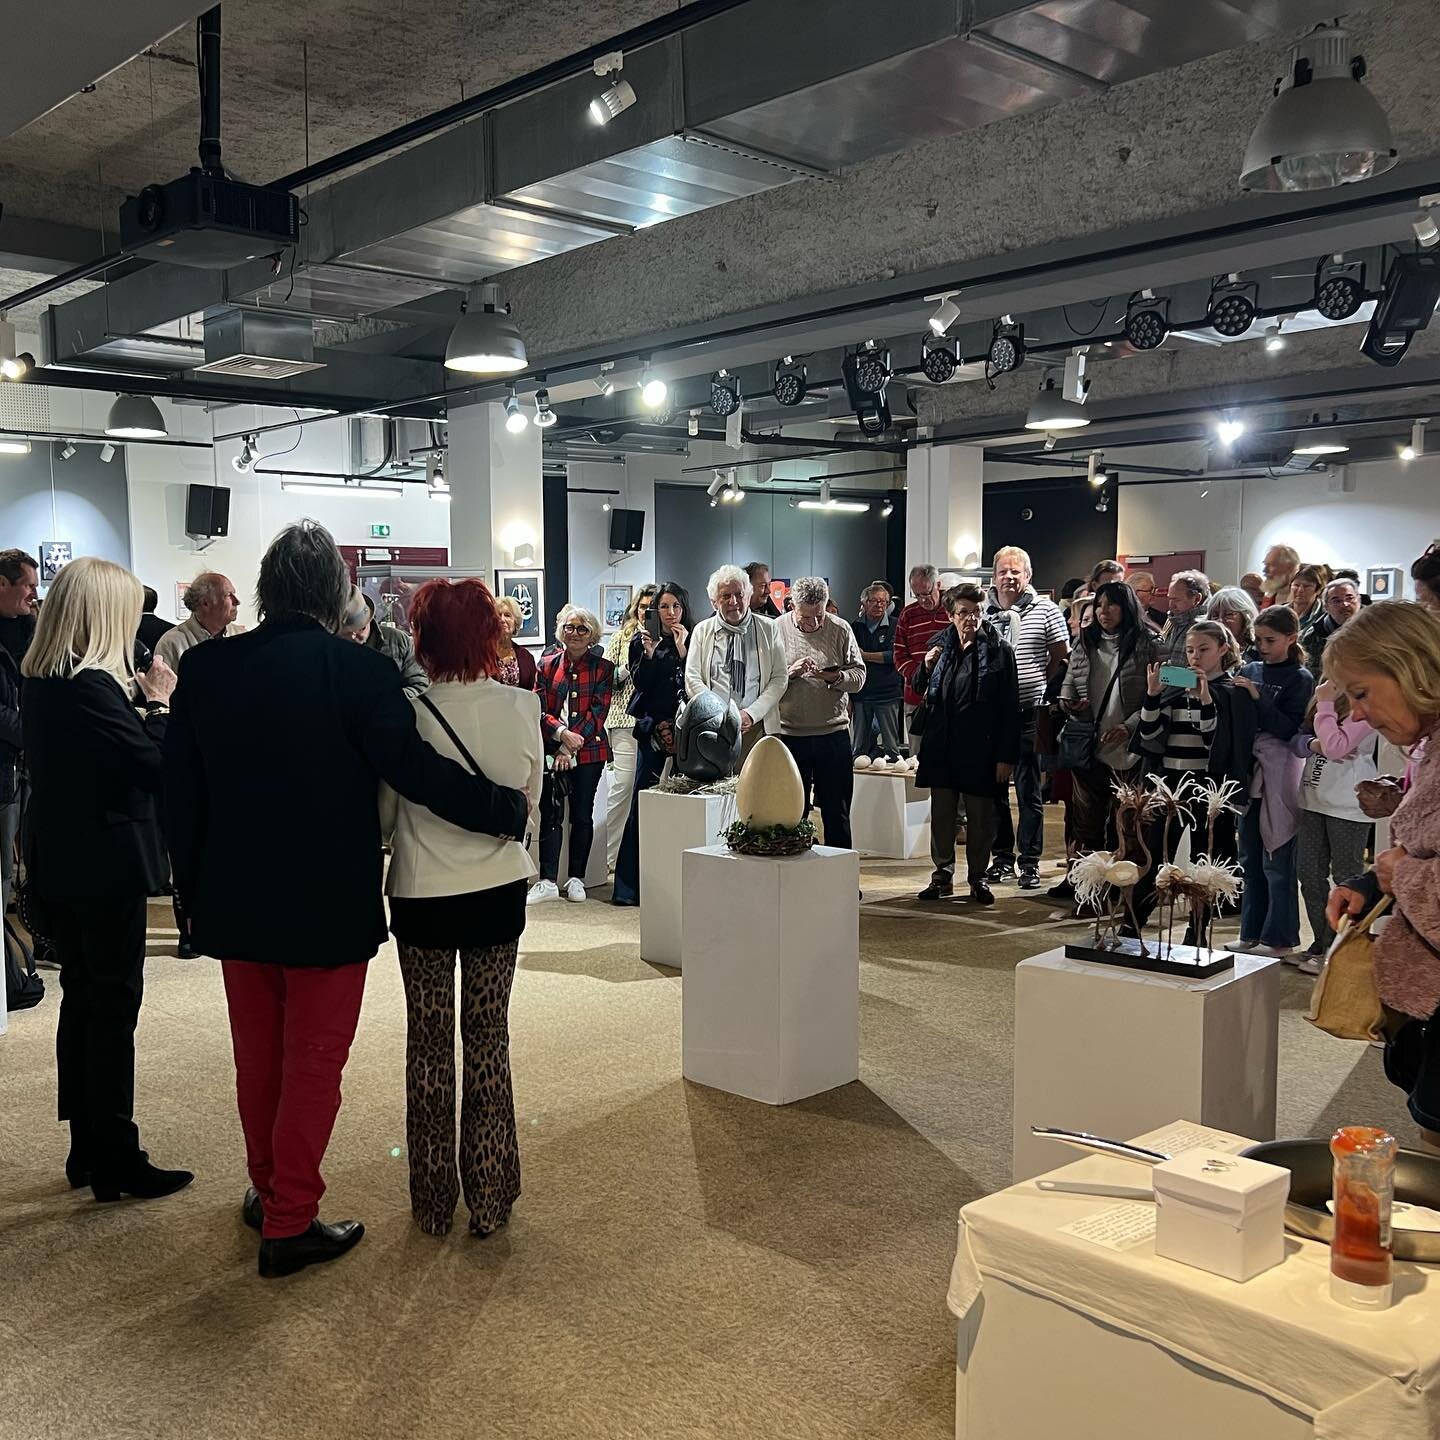 Amazing turn out! 
Merci! 

L&rsquo;OEUF! 
Th&egrave;oule Expo &lsquo;24 
Espace Culturel
Th&egrave;oule-sur-Mer 

You can find &lsquo;one of a kind jewelry&rsquo; pieces, EGGSposition created by @suzetteoneofakindjewelry together with 30 other inter